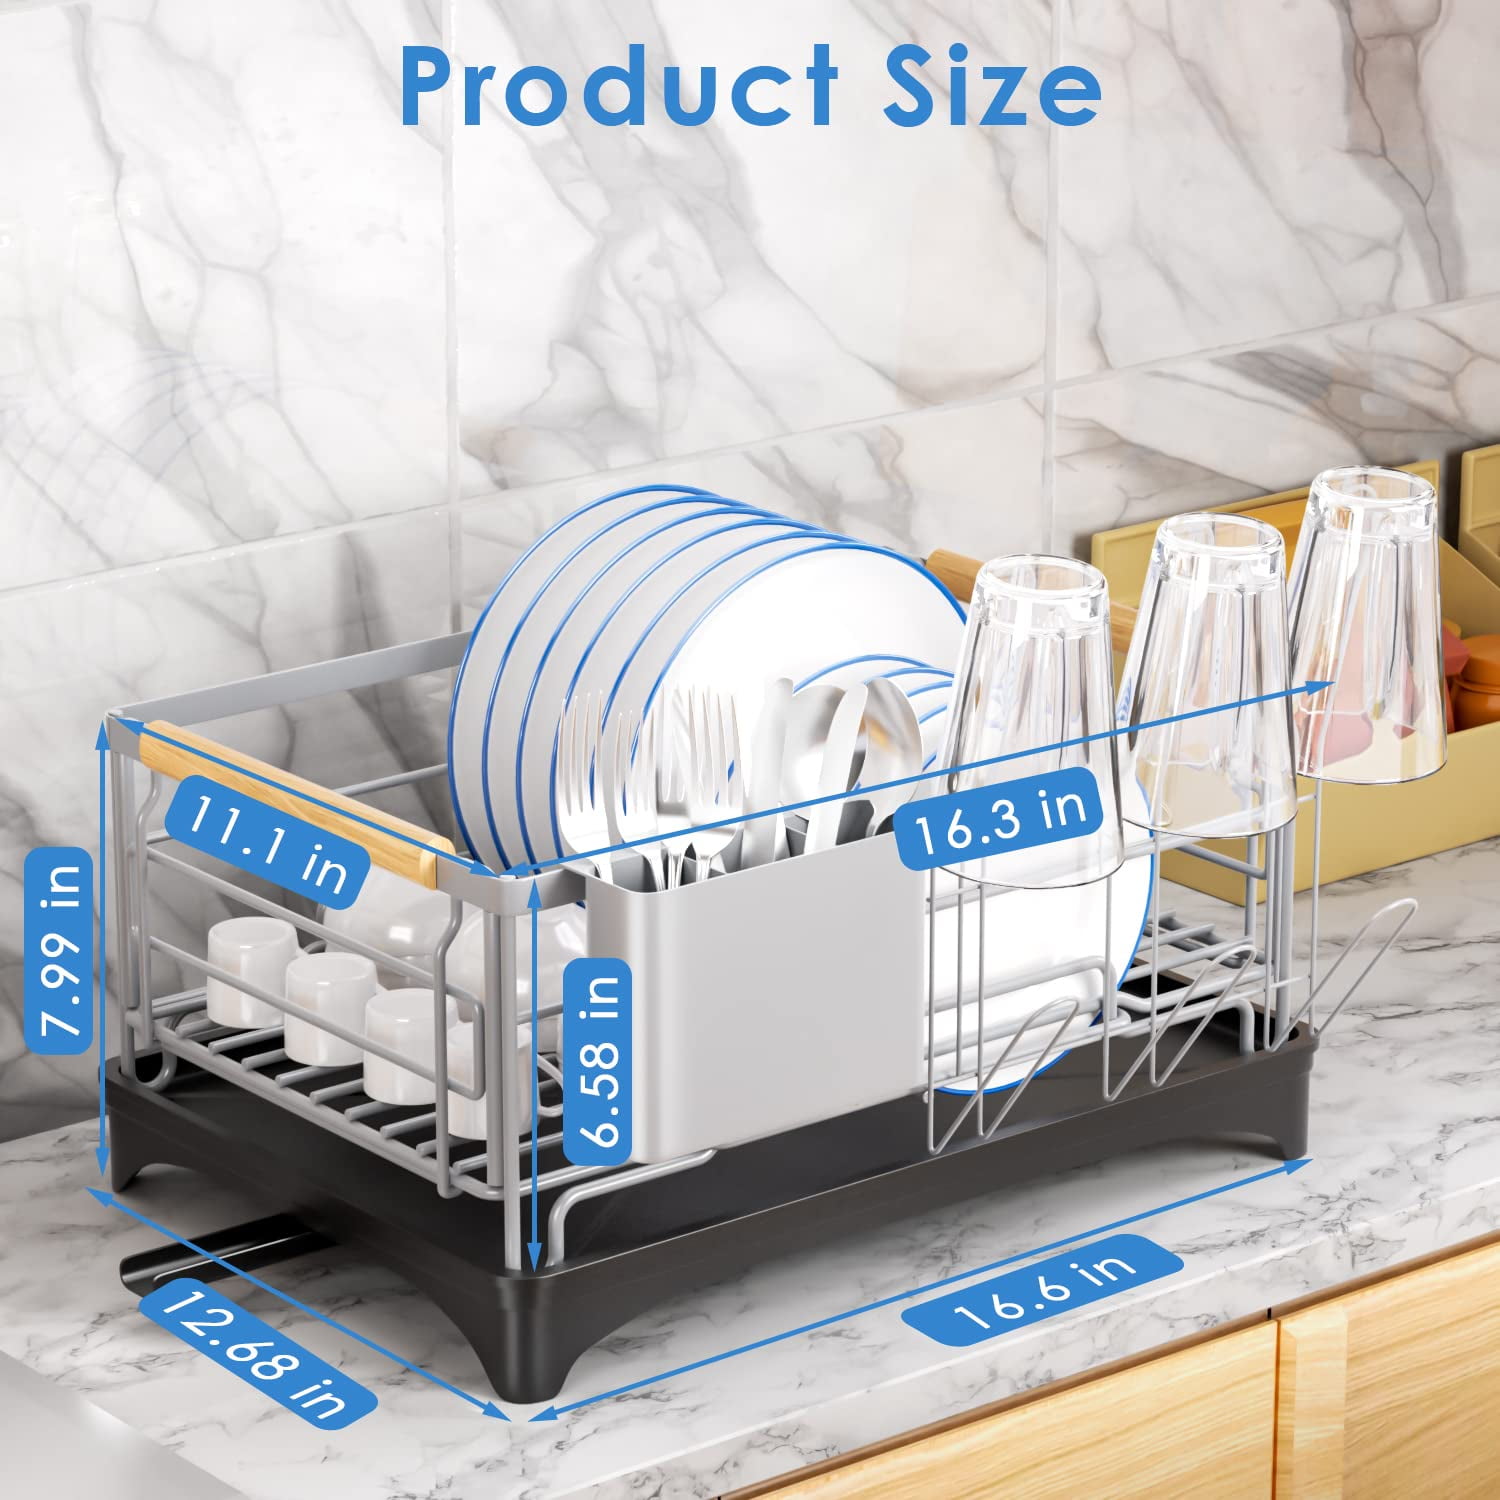 Dish Drying Rack, Dish Rack for Kitchen Counter, Rust-Proof Dish Drainer  with Drying Board and Utensil Holder for Kitchen Counter Cabinet,  16.6\u201d L× 12.6\u201dW× 7.8\u201dH, Milk White 